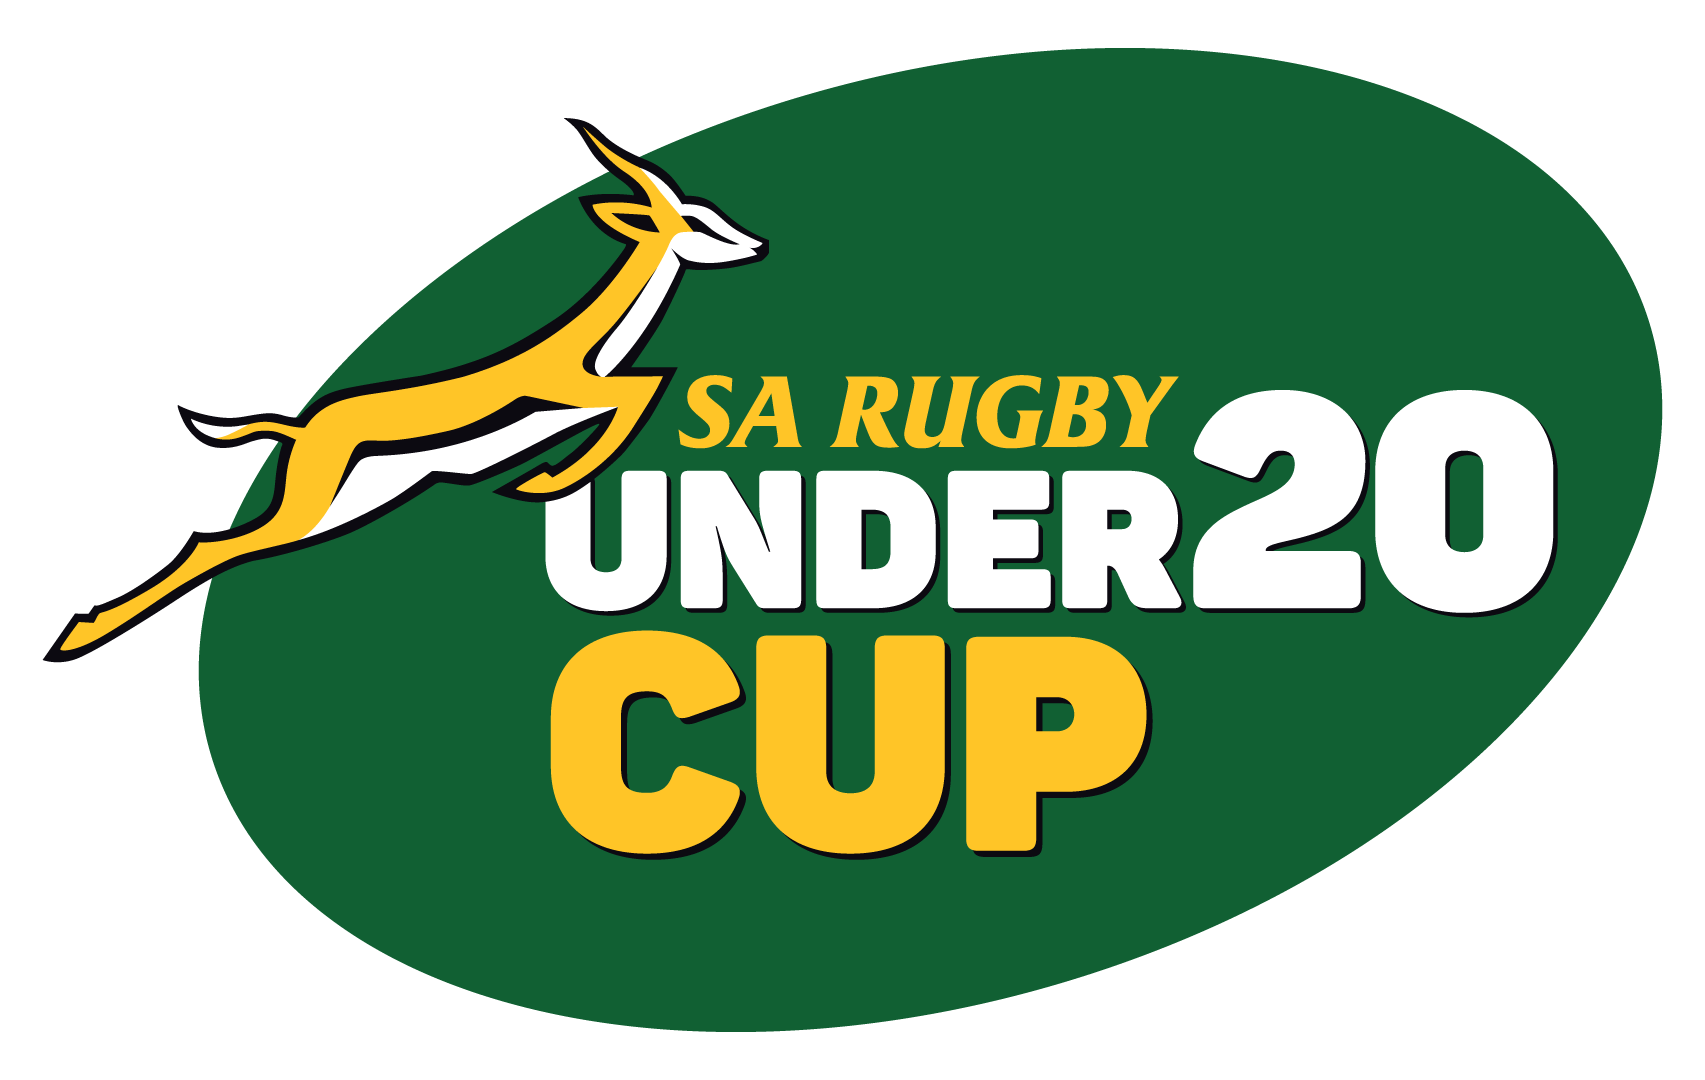 SA RUGBY UNDER-20 CUP